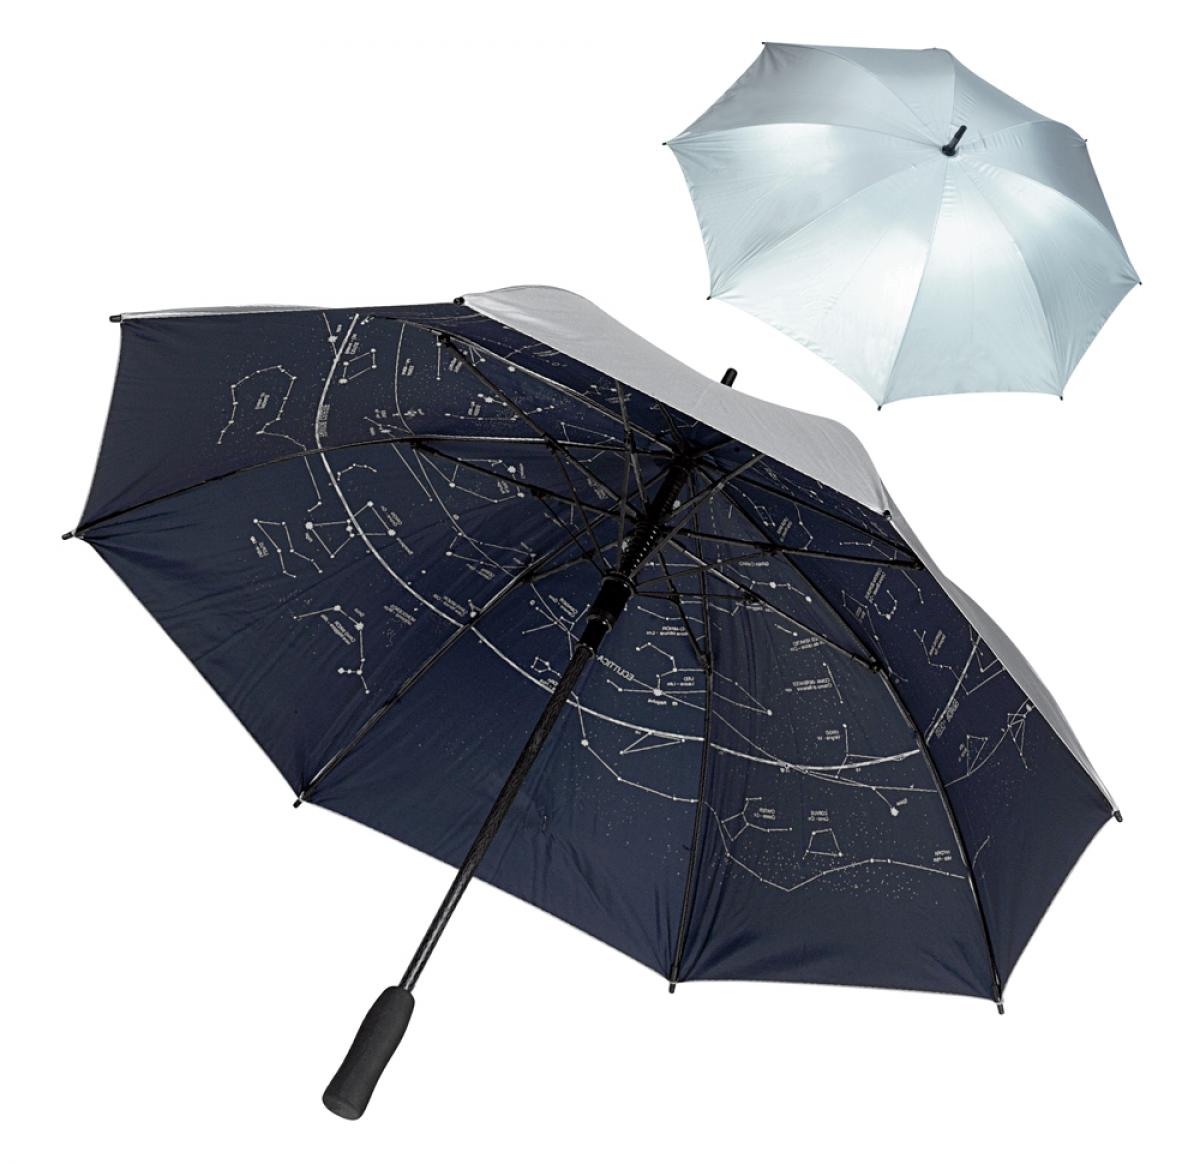 Stormproof automatic umbrella with constellation print under the canopy